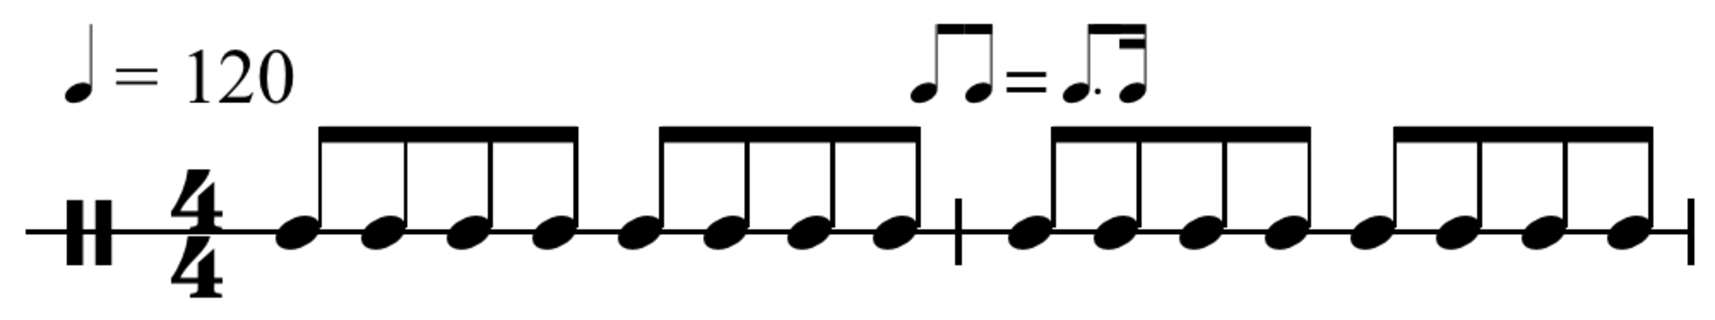 What does a quarter note plus a eighth note equal